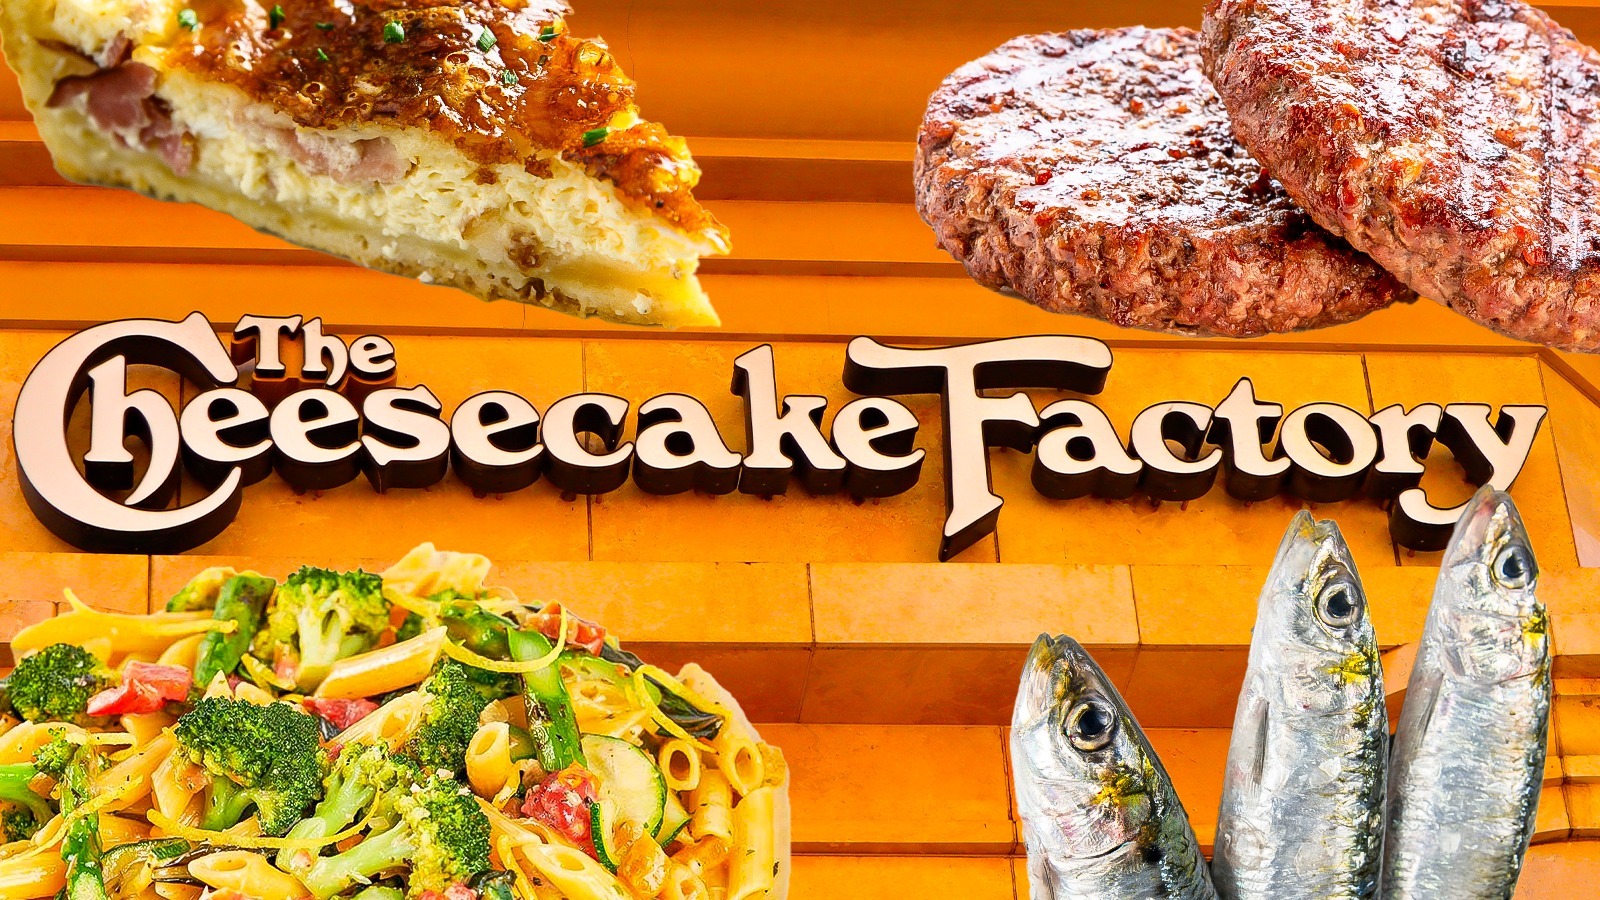 Cheesecake Factory $9 Gift Card US